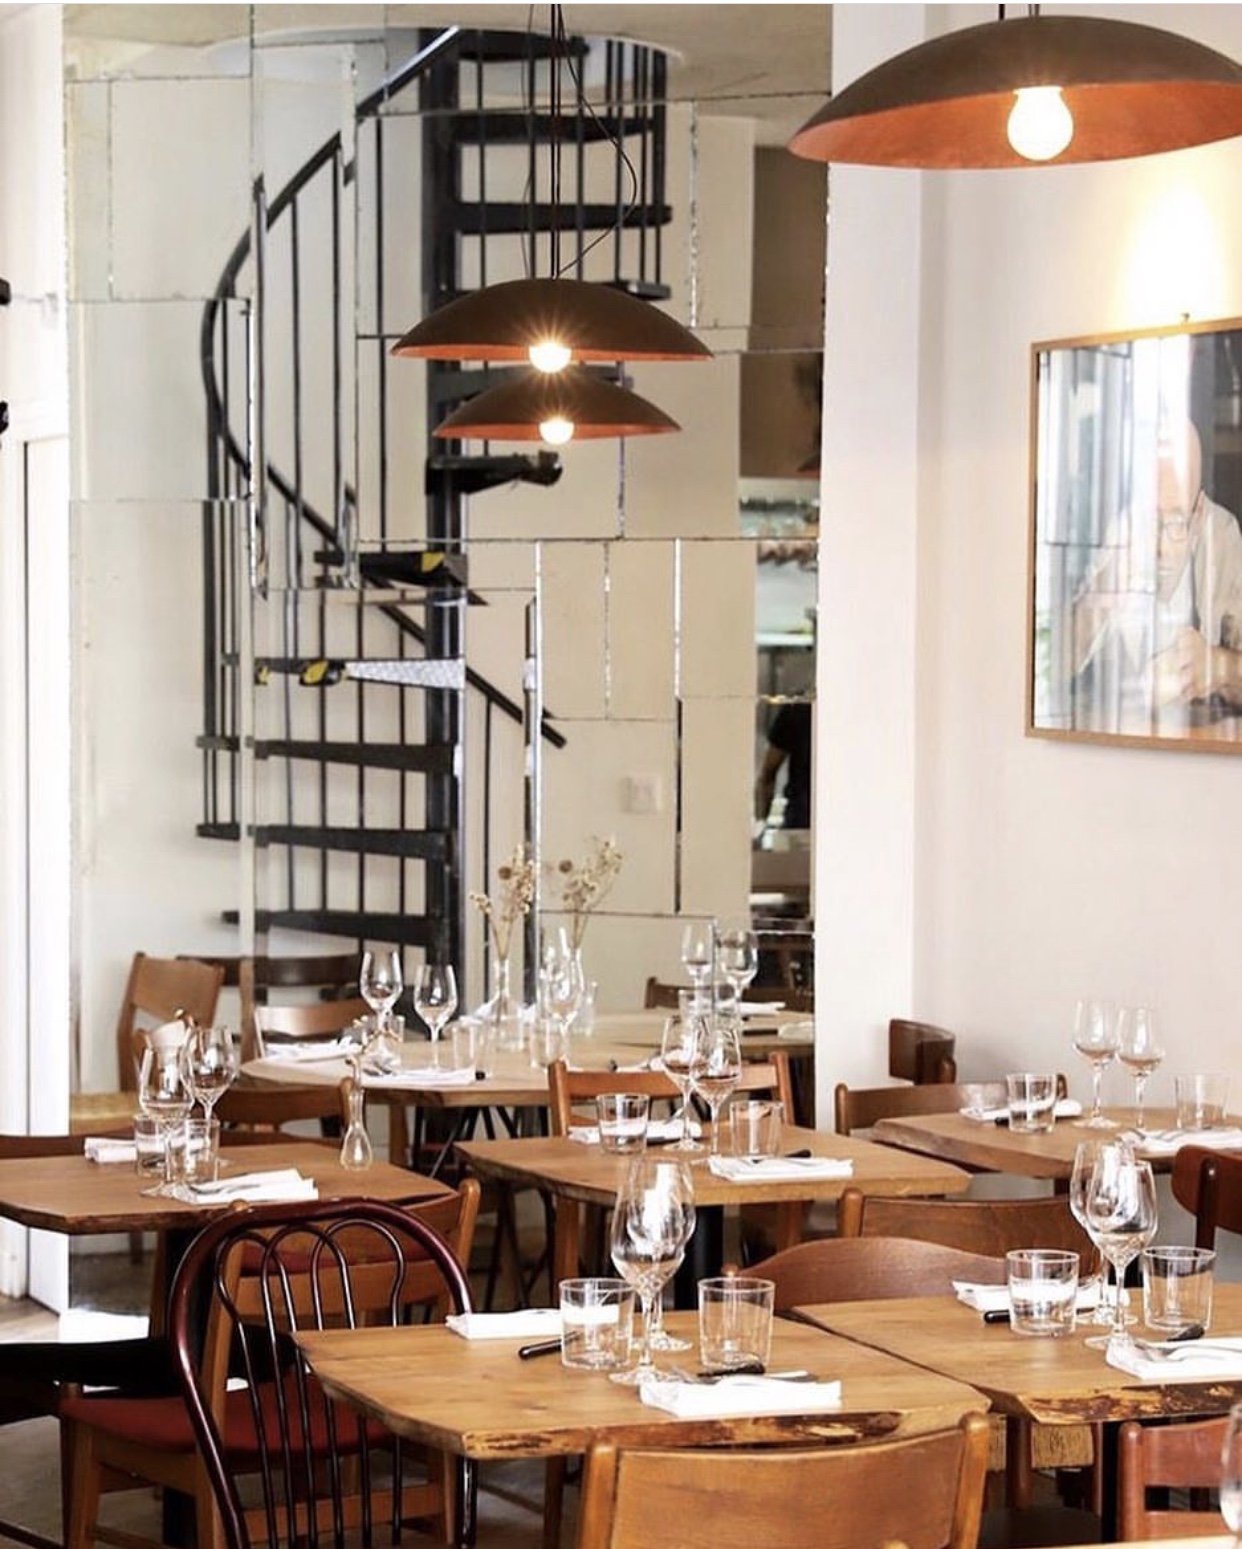 City Guide: 5 Places for Lunch During Paris Fashion Week